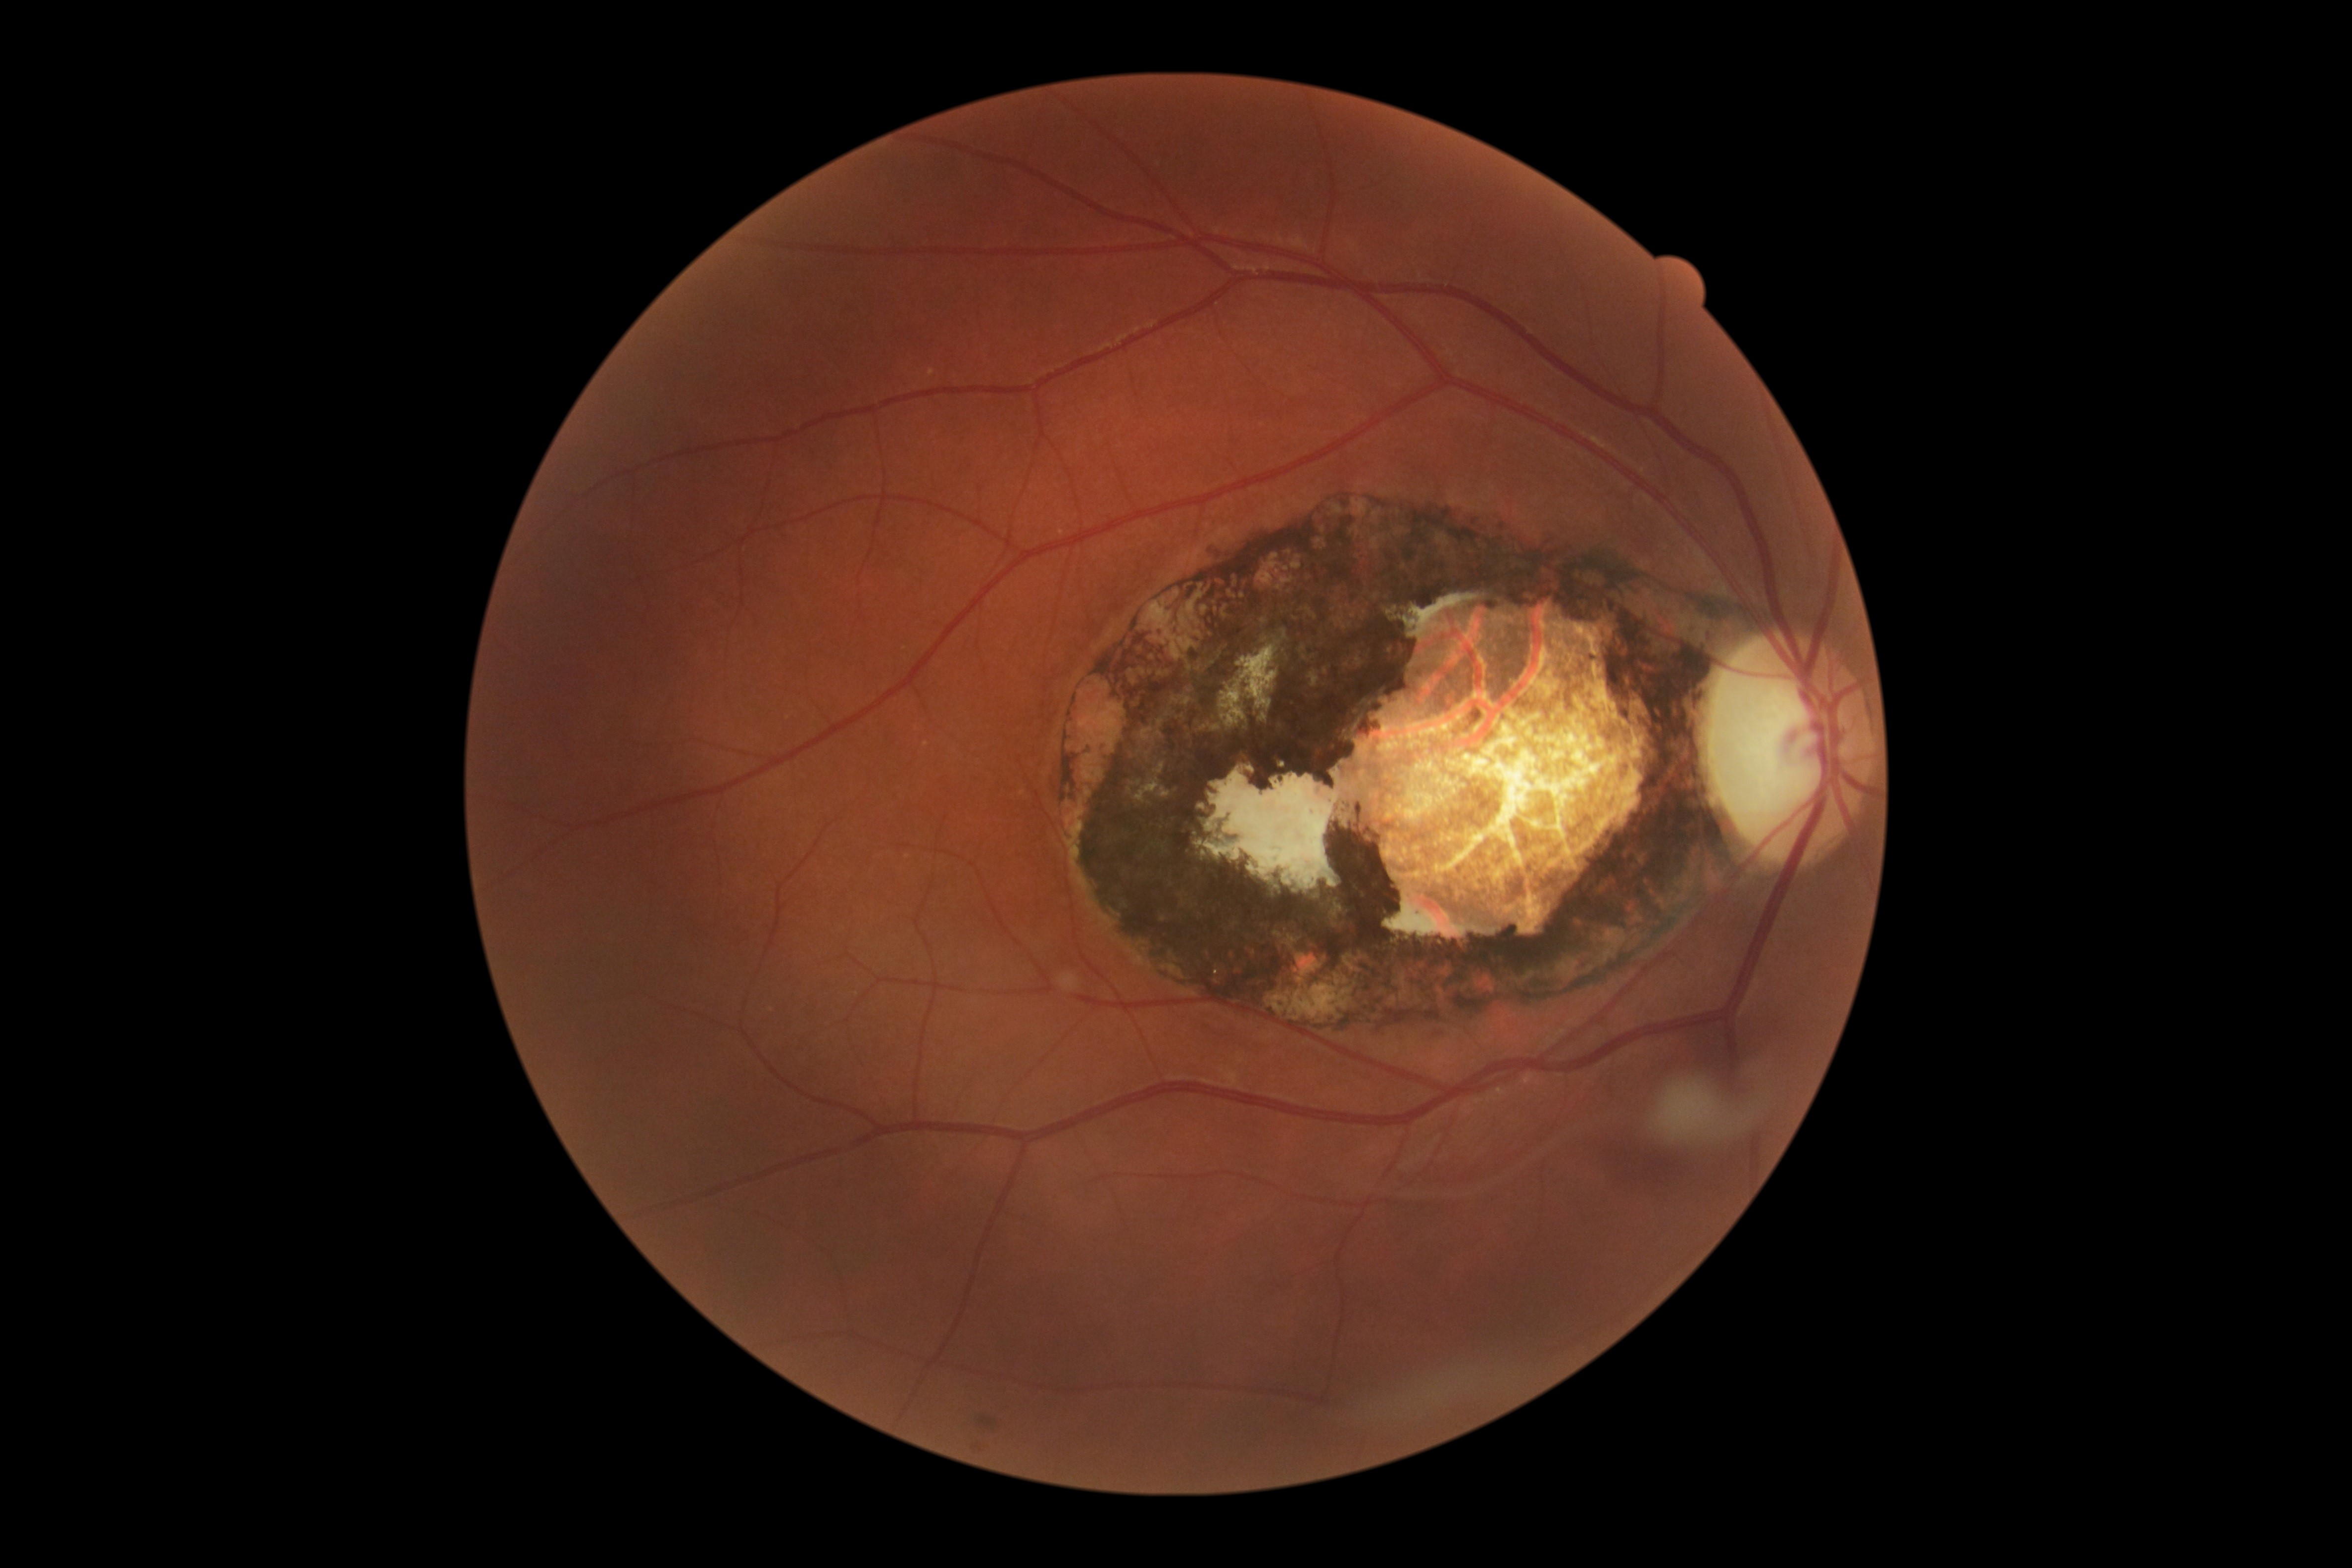 Ocular toxoplasmosis: more common than thought